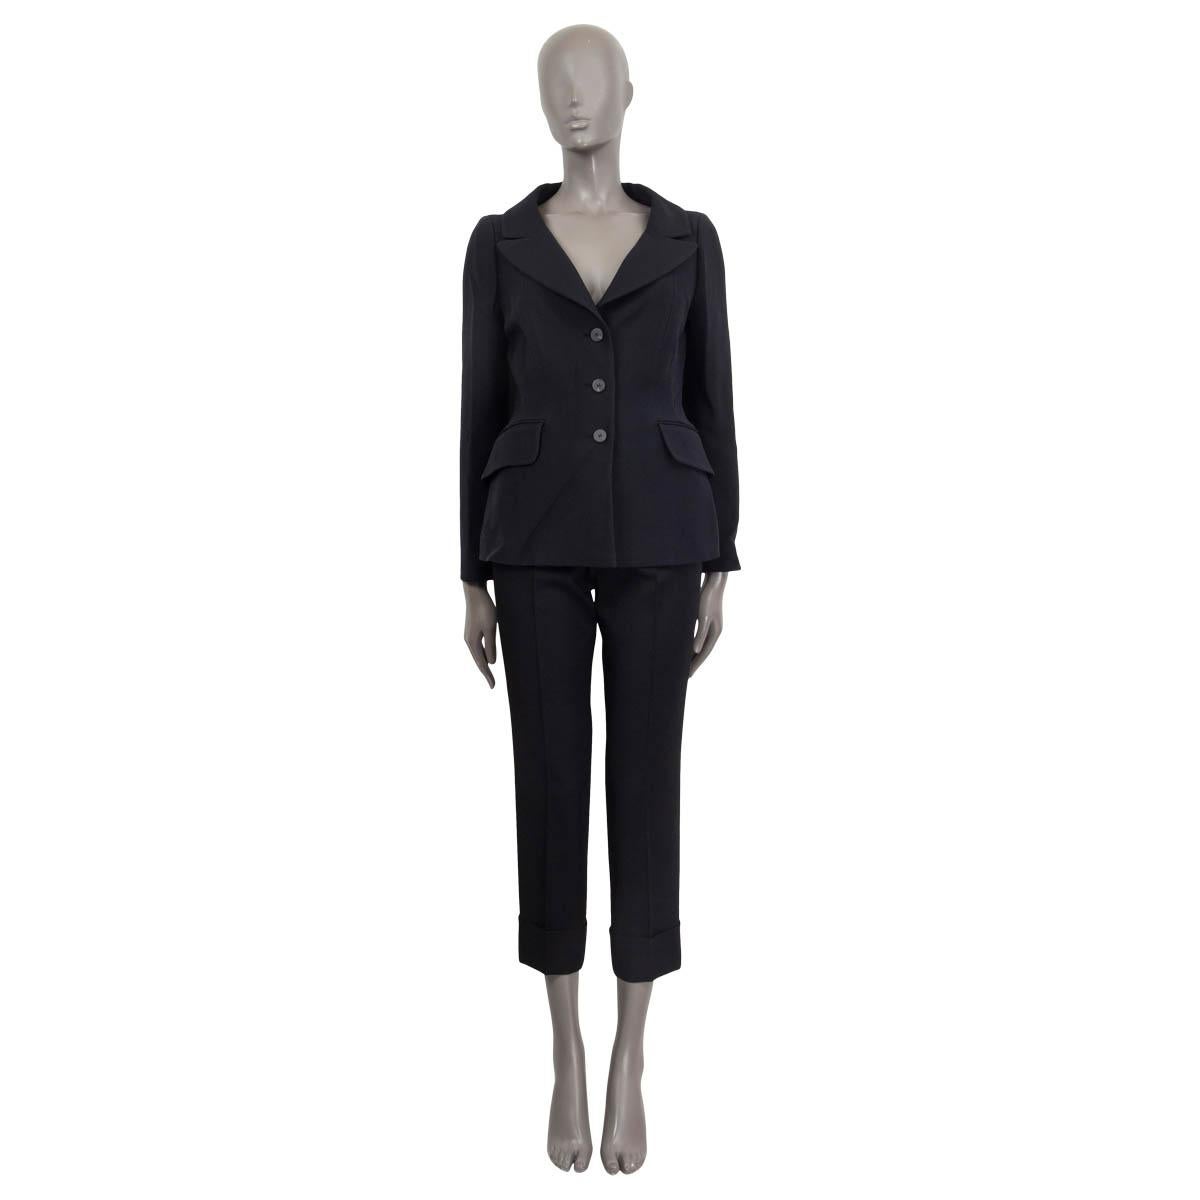 100% authentic Christian Dior classic blazer in black wool (77%) and silk (23%). Features portrait collar, two sewn shut flap pockets and buttoned cuffs. Opens with three buttons. Lined in black silk (100%). Has been worn and is in excellent